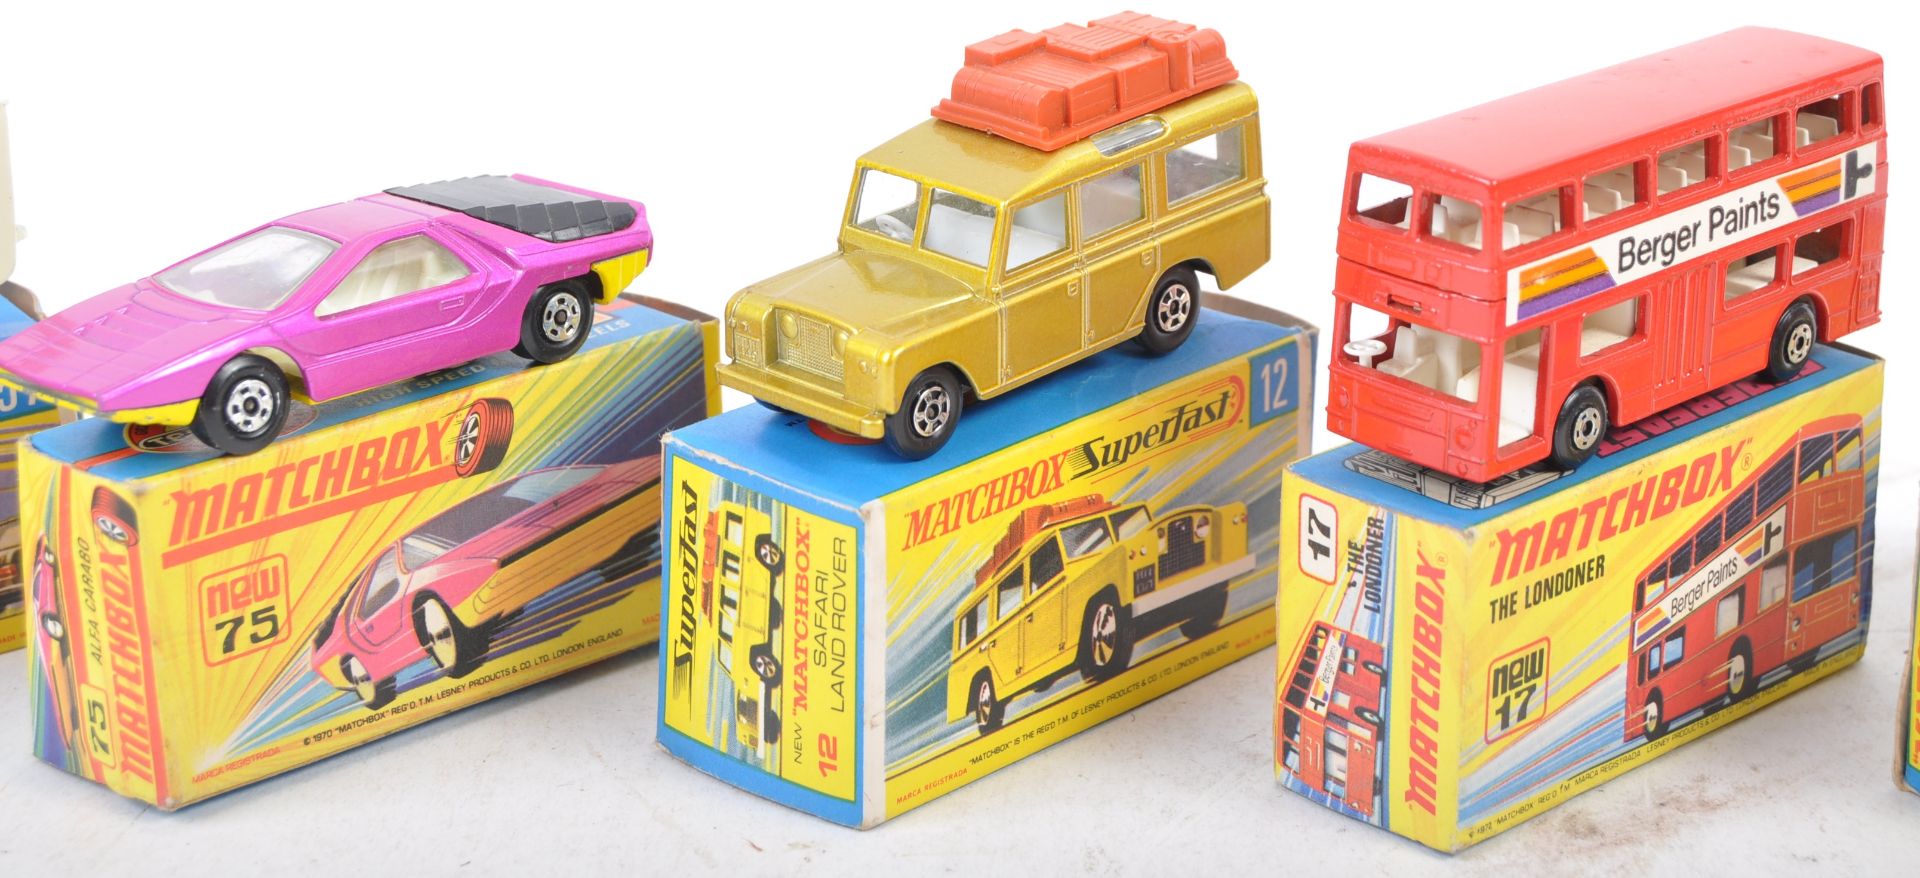 COLLECTION OF VINTAGE MATCHBOX SUPERFAST BOXED DIECAST MODELS - Image 3 of 4